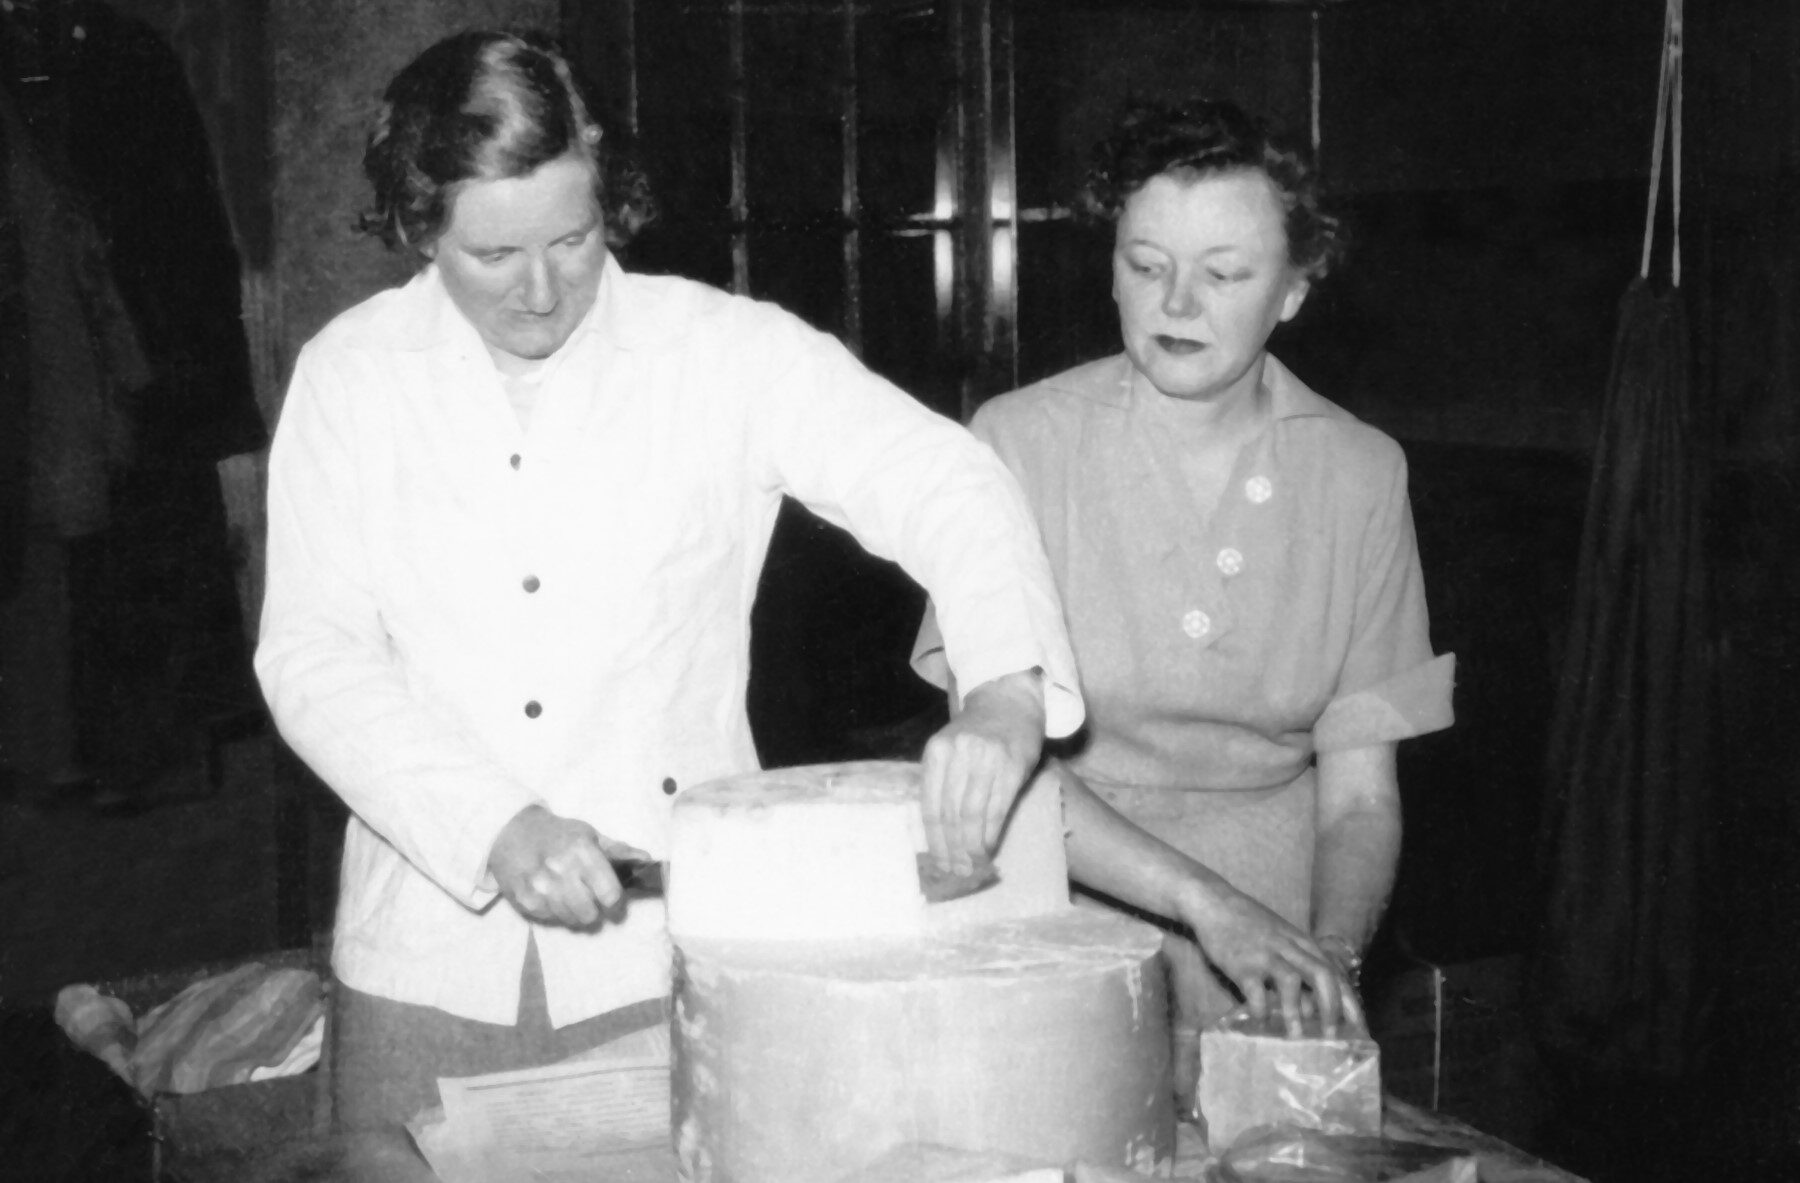 A black and white photo of two women cutting cheese